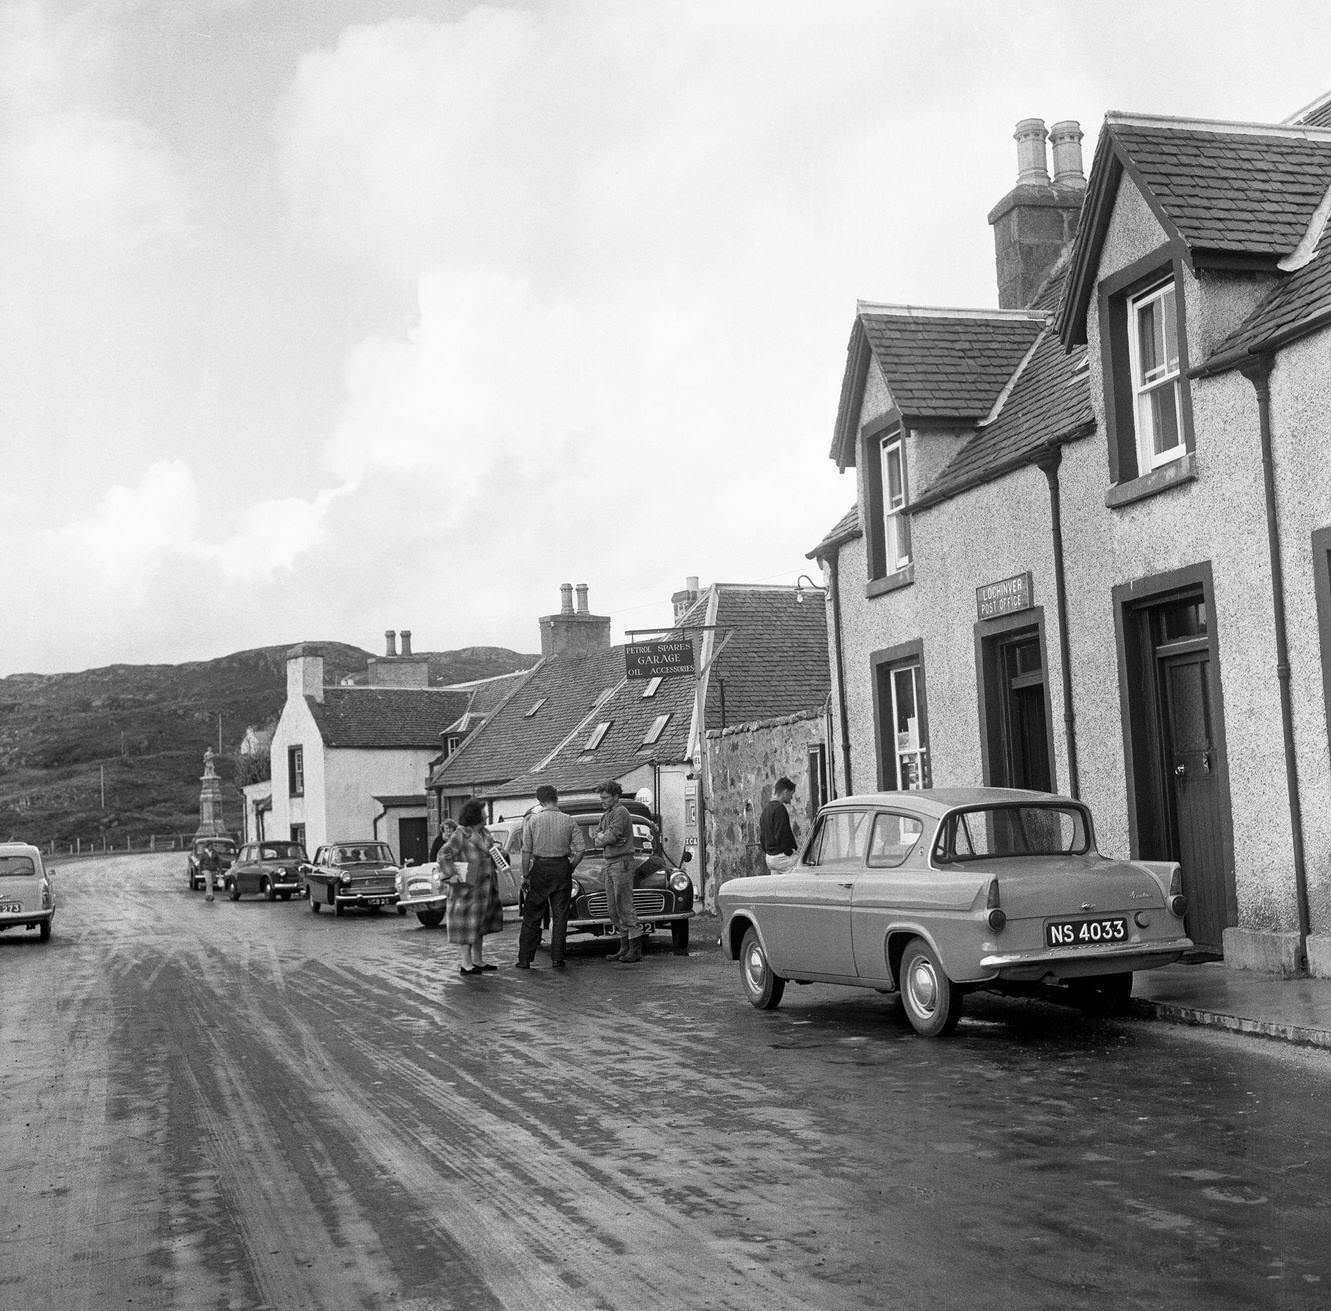 General scenes of Lochinver, a village on the coast in the Assynt district of Sutherland, Highland, Scotland, 3rd August 1962.